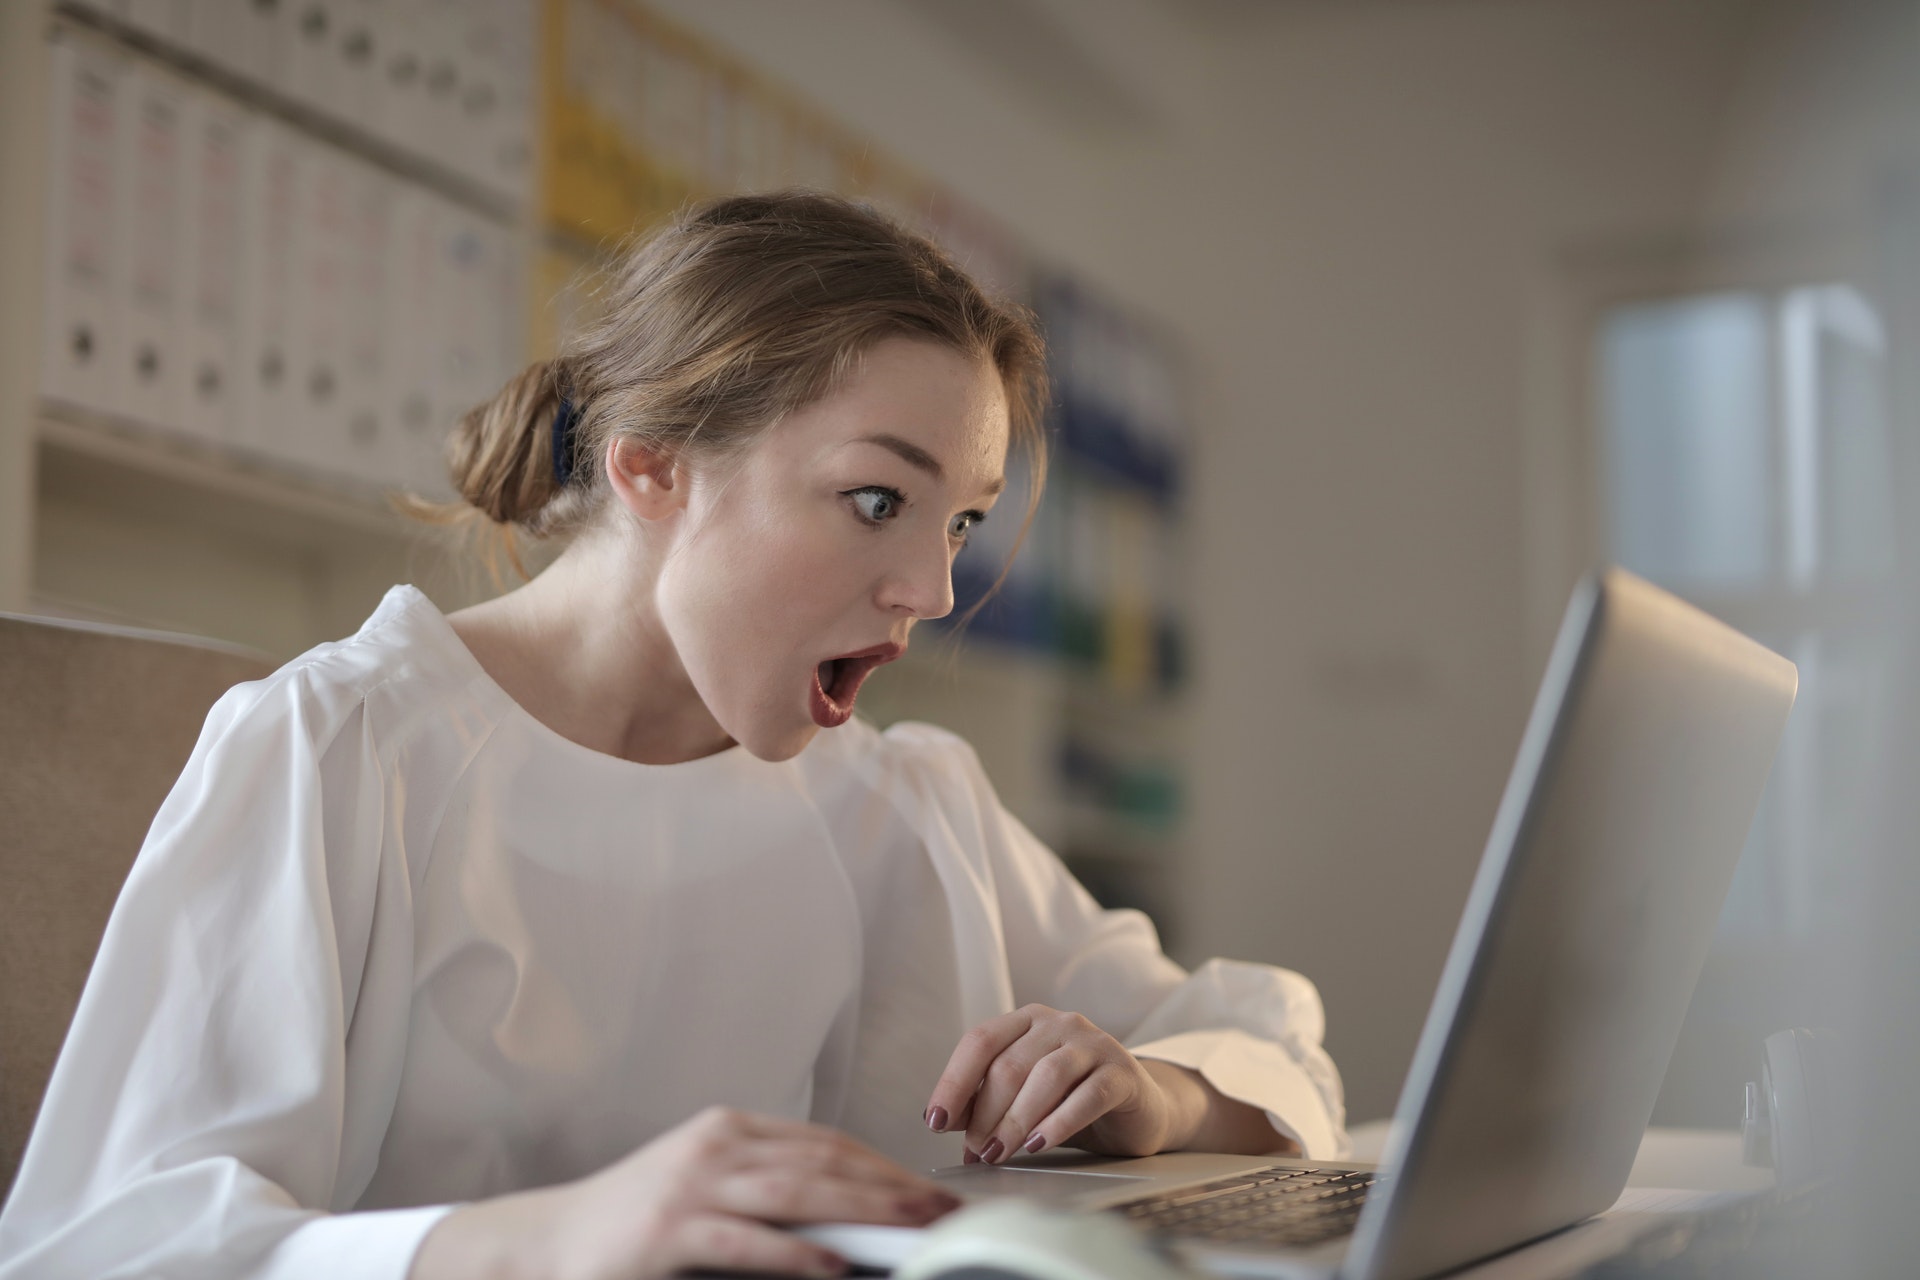 Woman looking at laptop in shock